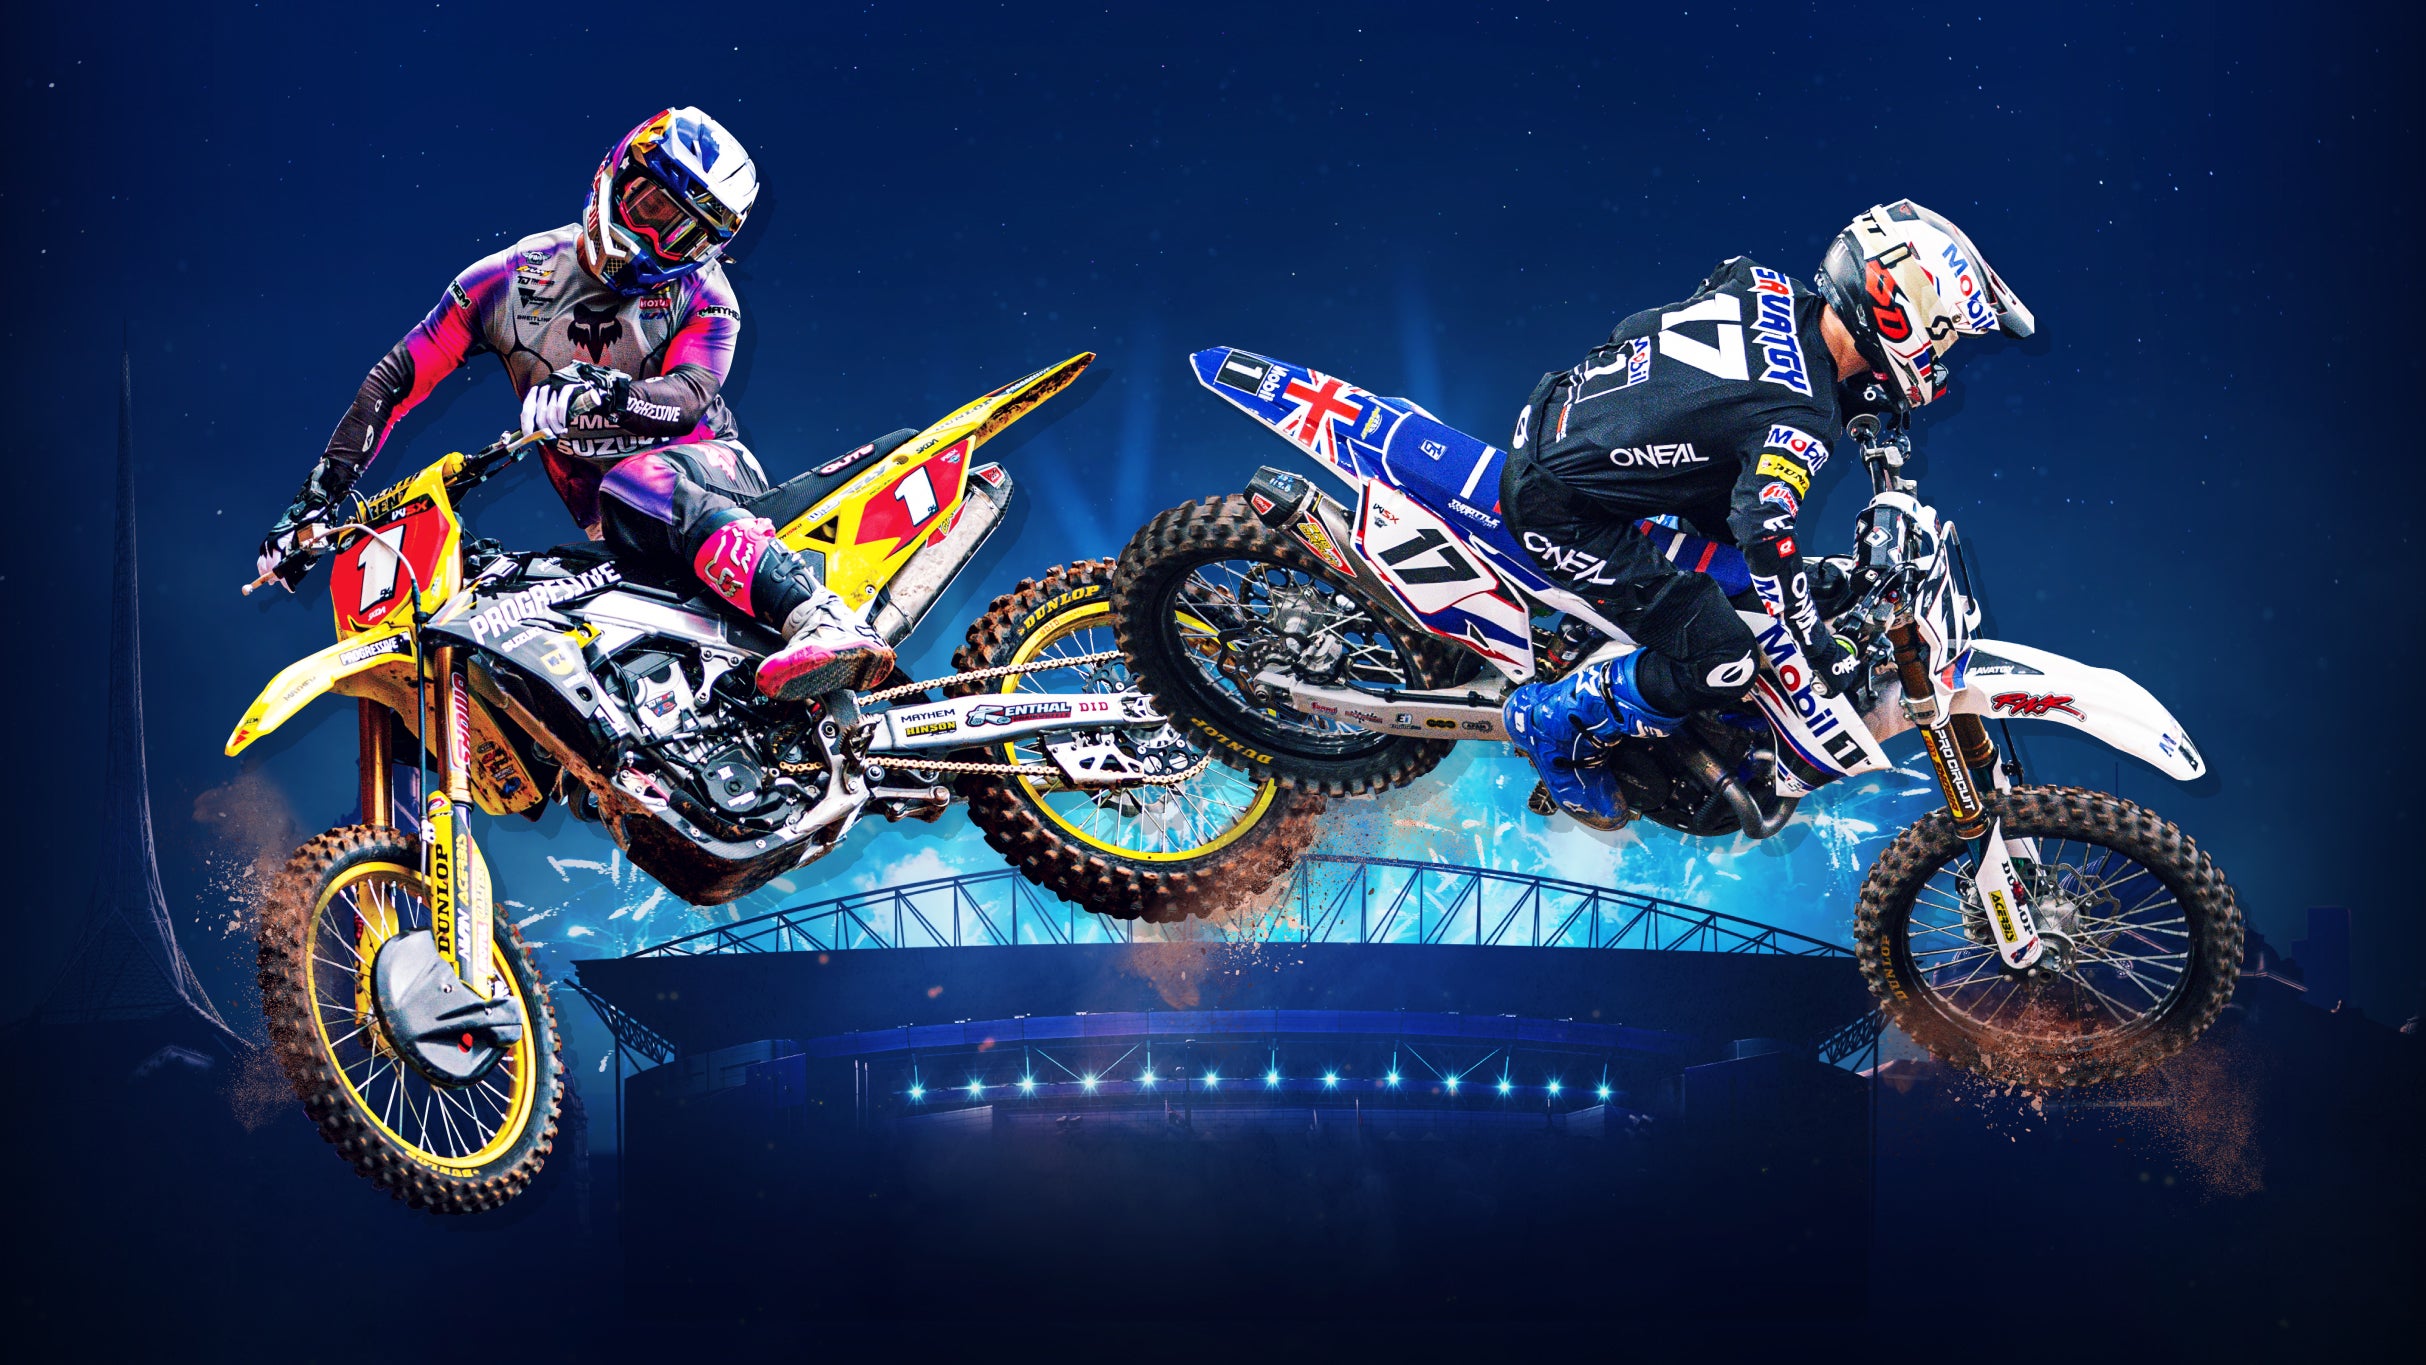 FIM WSX World Supercross Australian Grand Prix - Friday Tickets in Docklands promo photo for Exclusive presale offer code